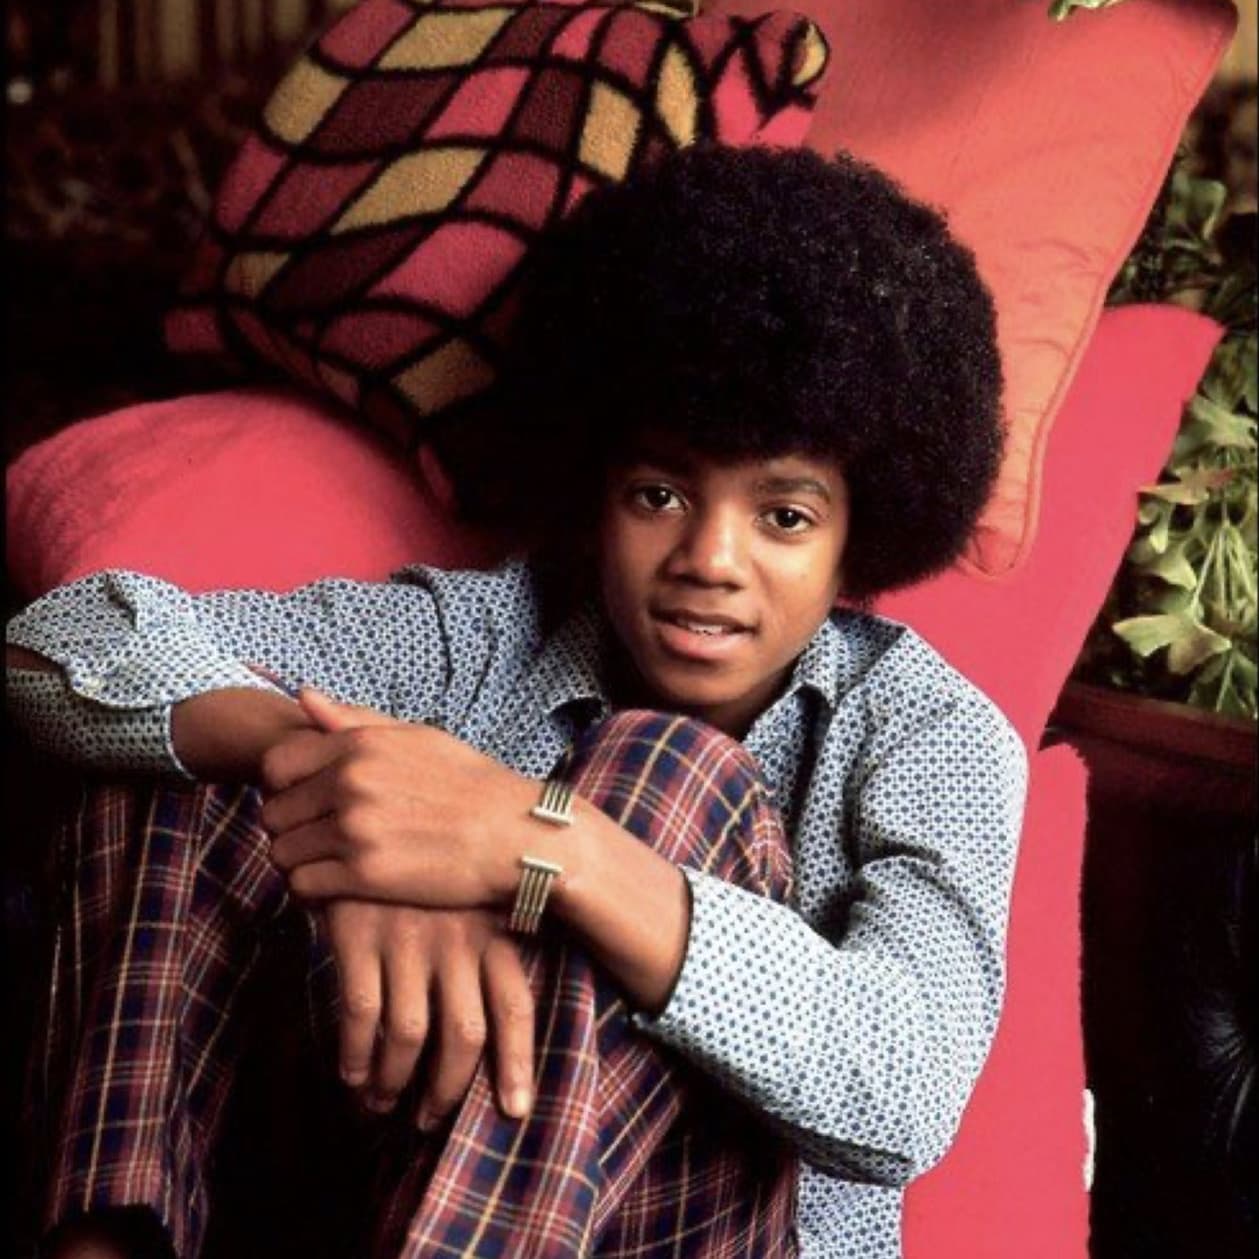 Happy birthday Michael Jackson. You inspired us all to be our best. 